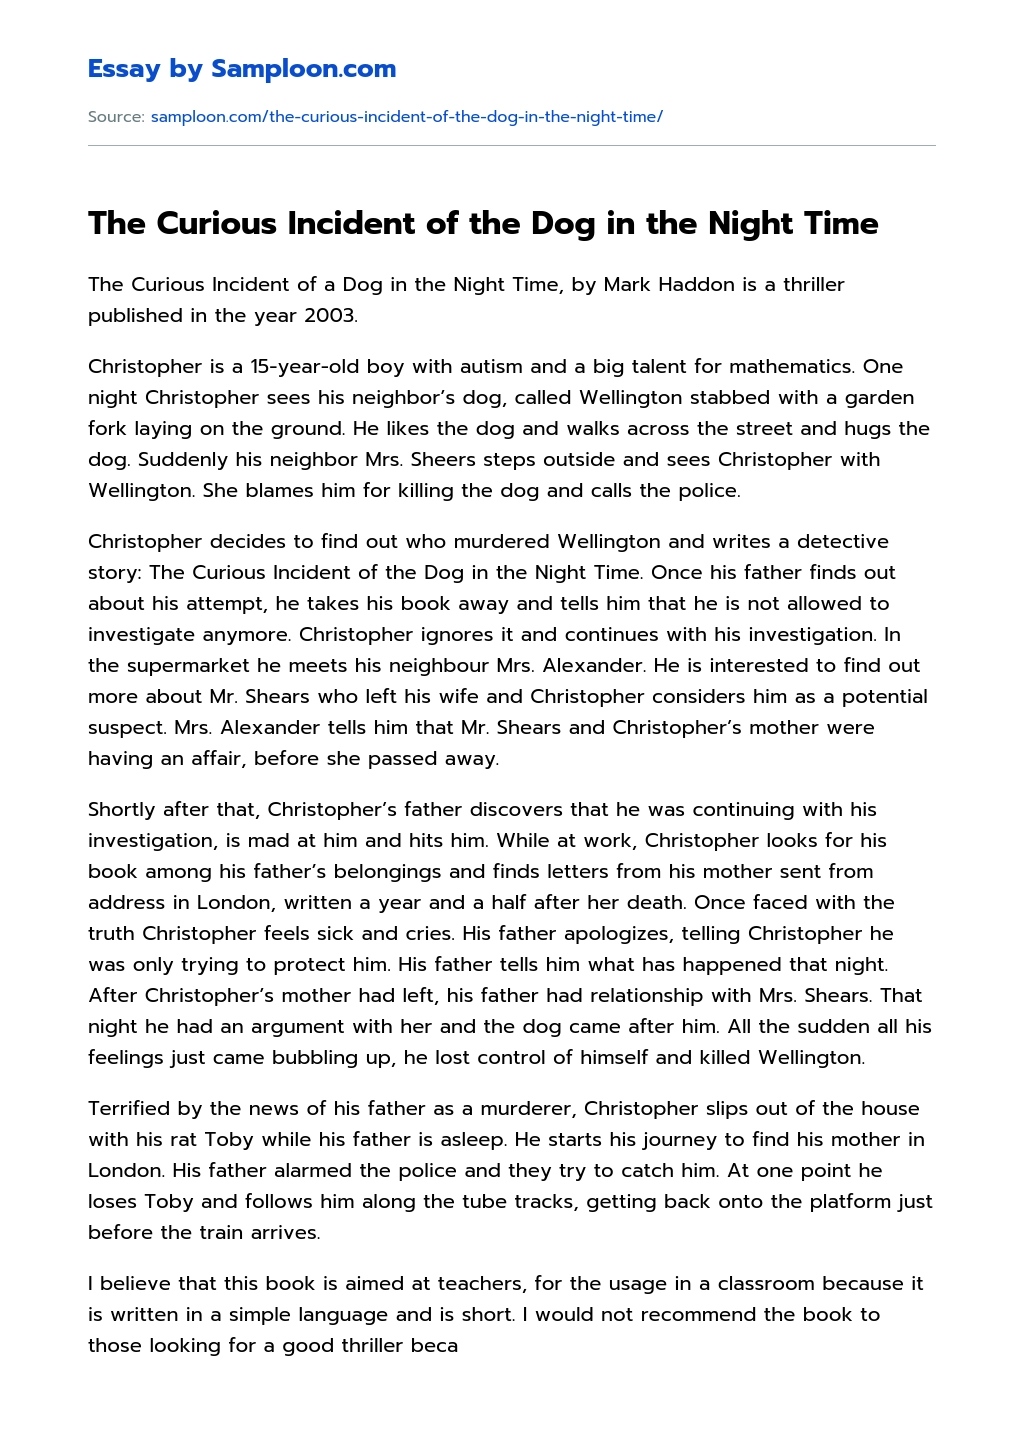 The Curious Incident of the Dog in the Night Time Review essay